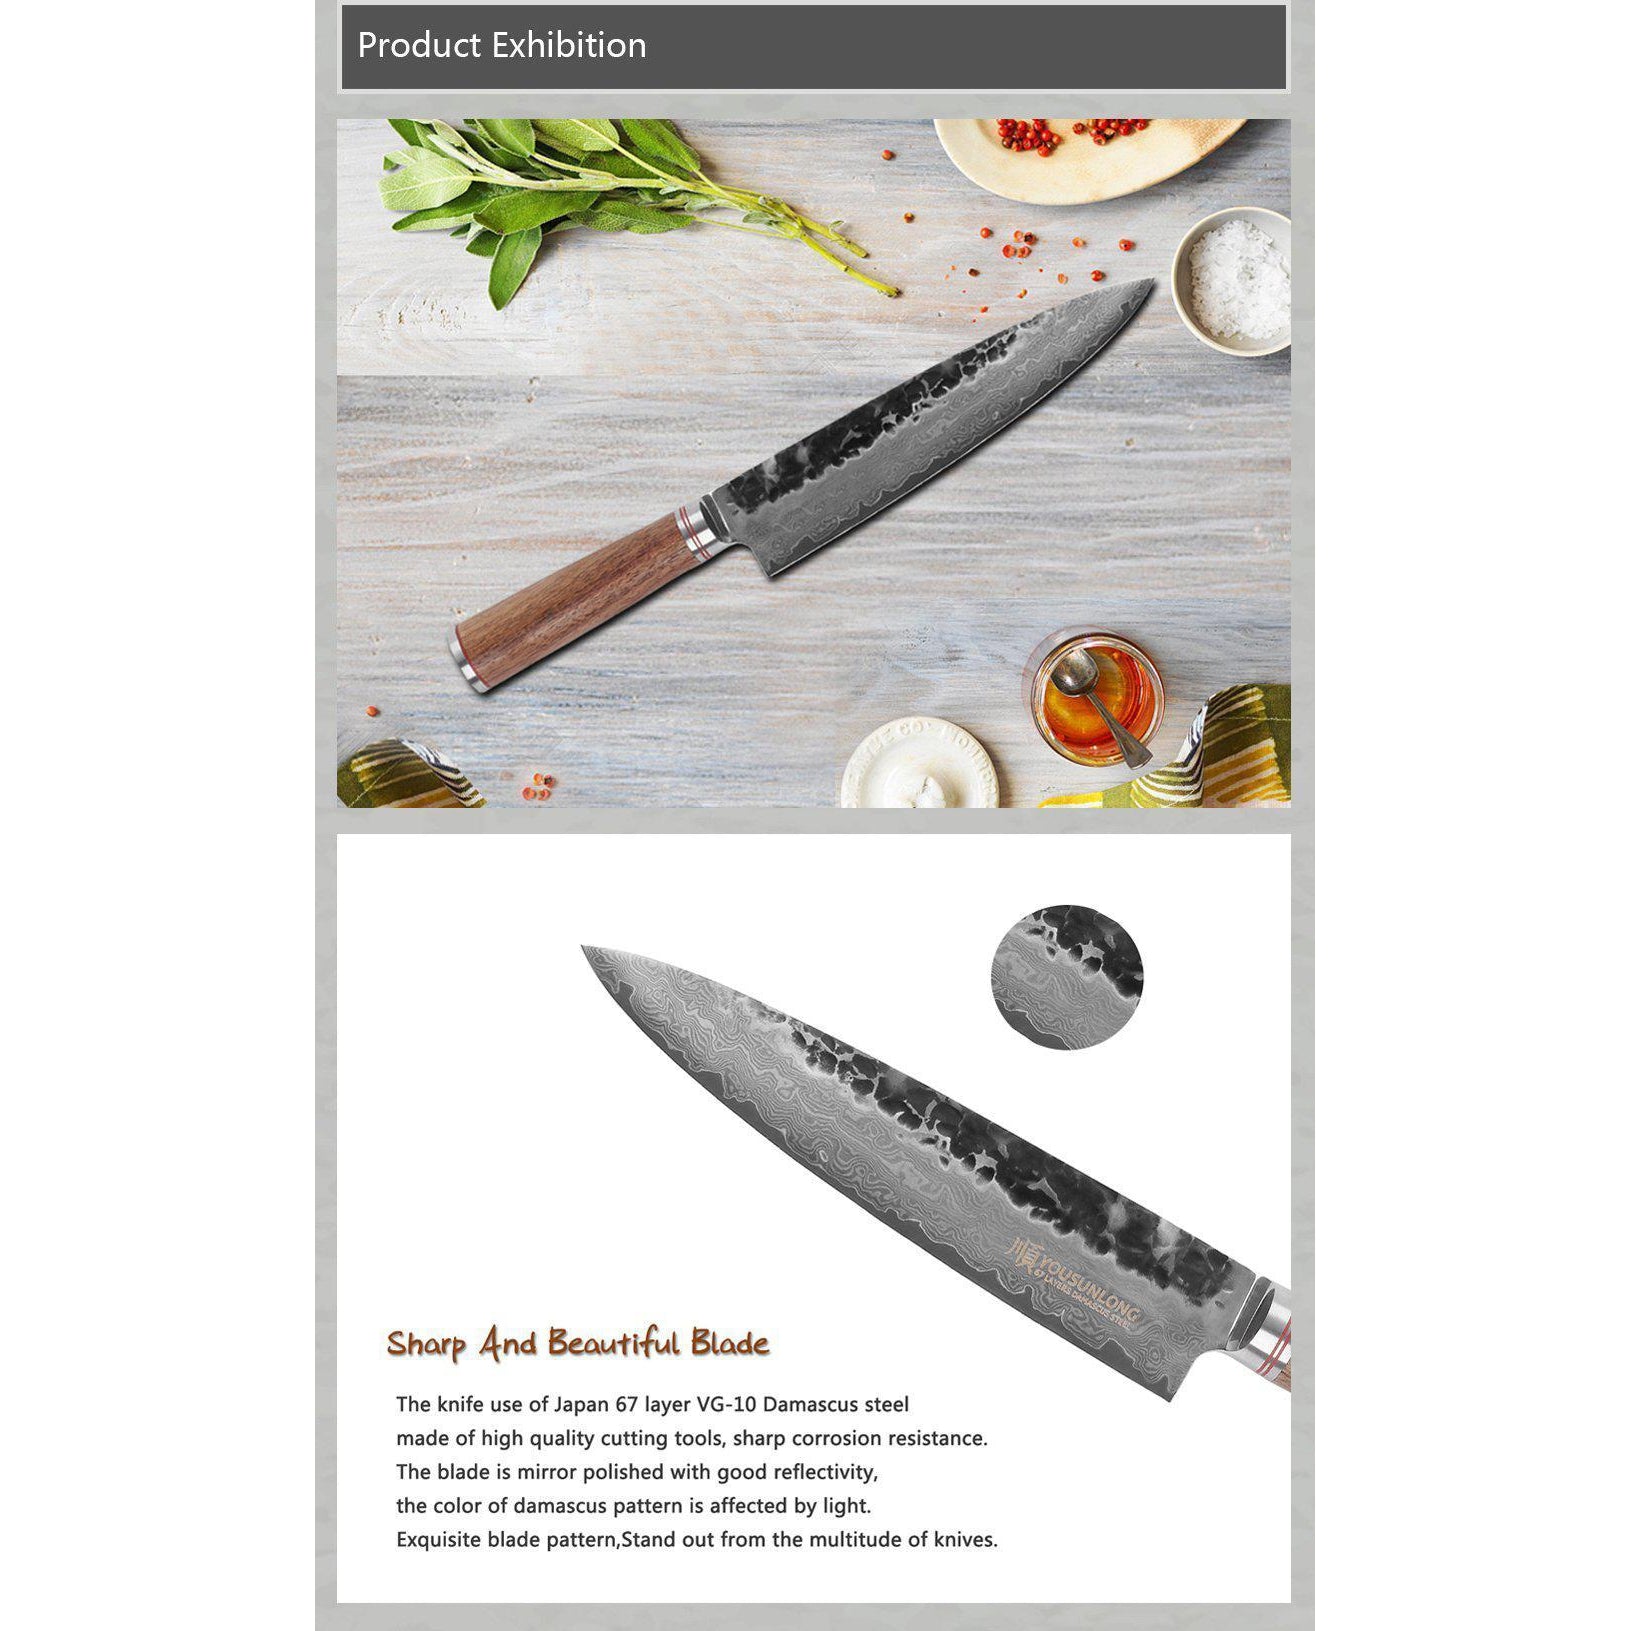 Sunlong 20cm Professional Chef Knife With Walnut Wood Handle-chef knife-Chef's Quality Cookware